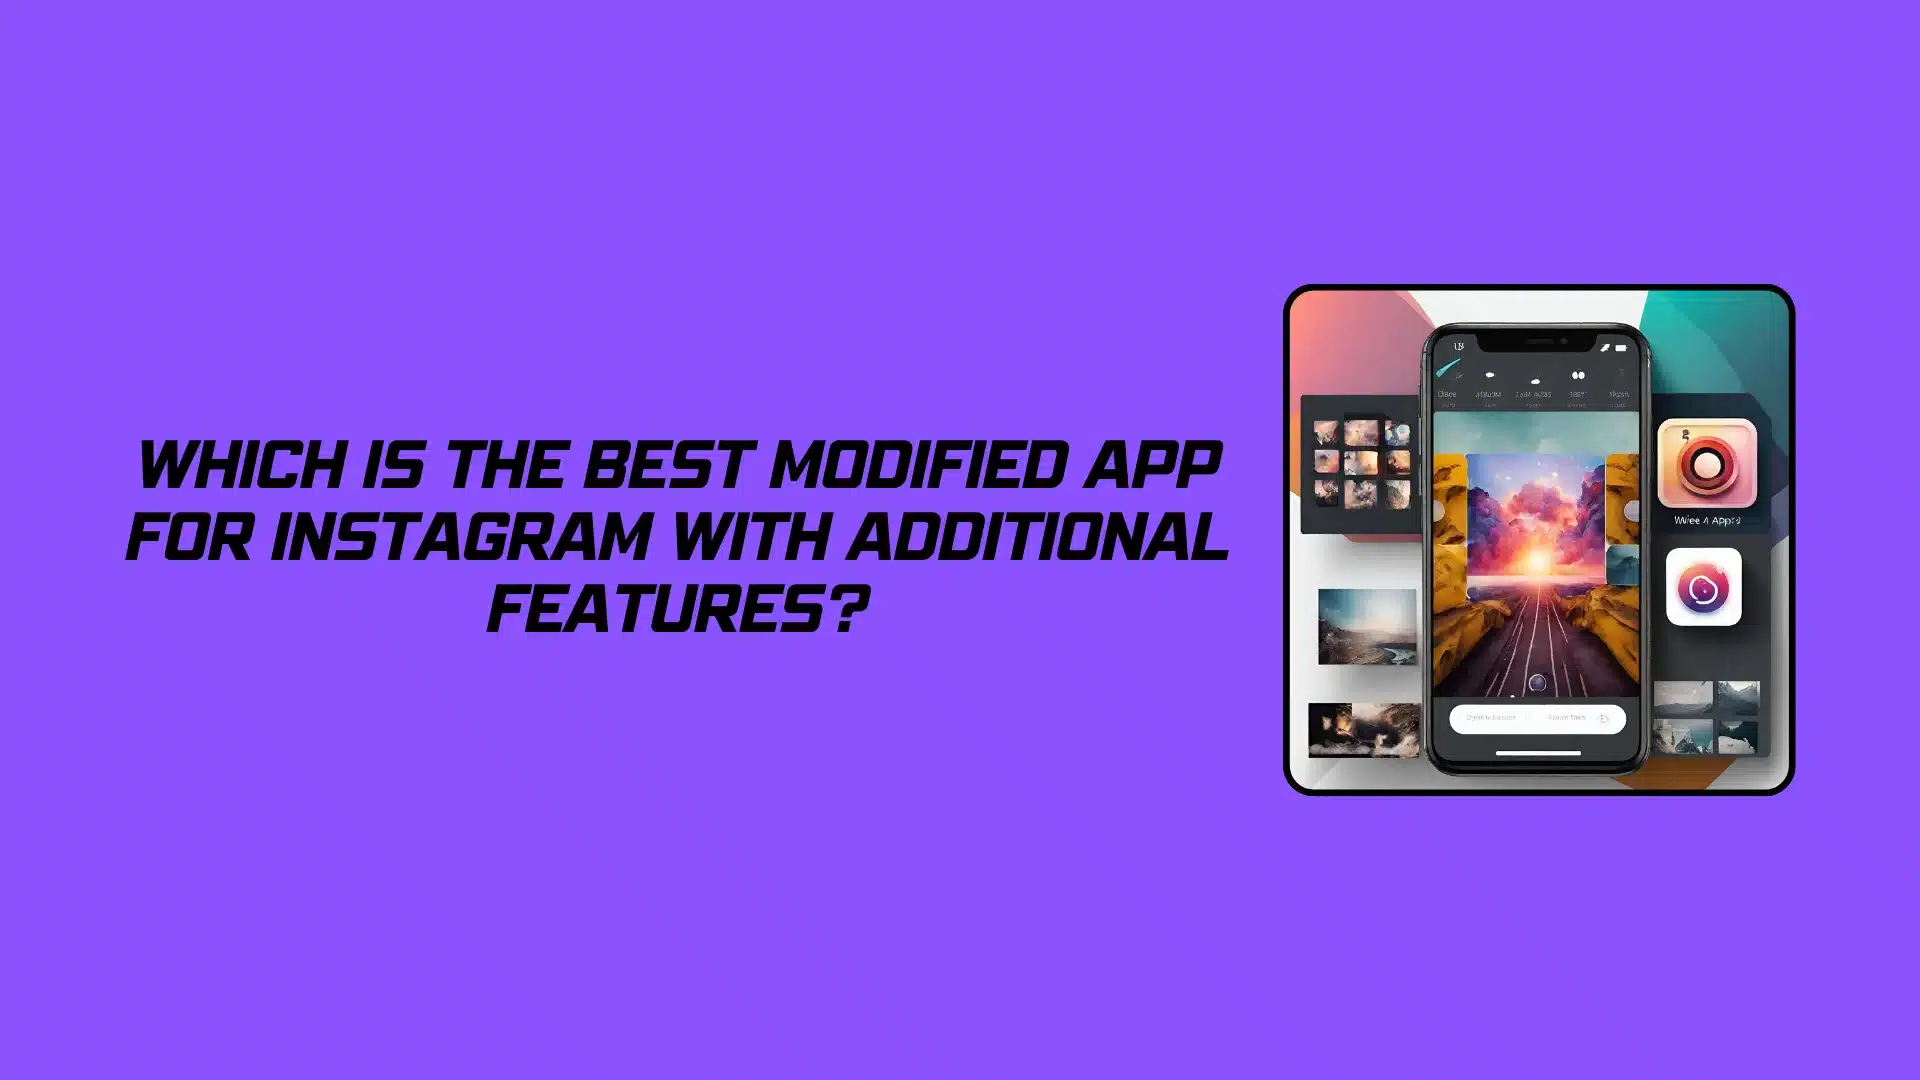 which is the best modified app for Instagram with additional features